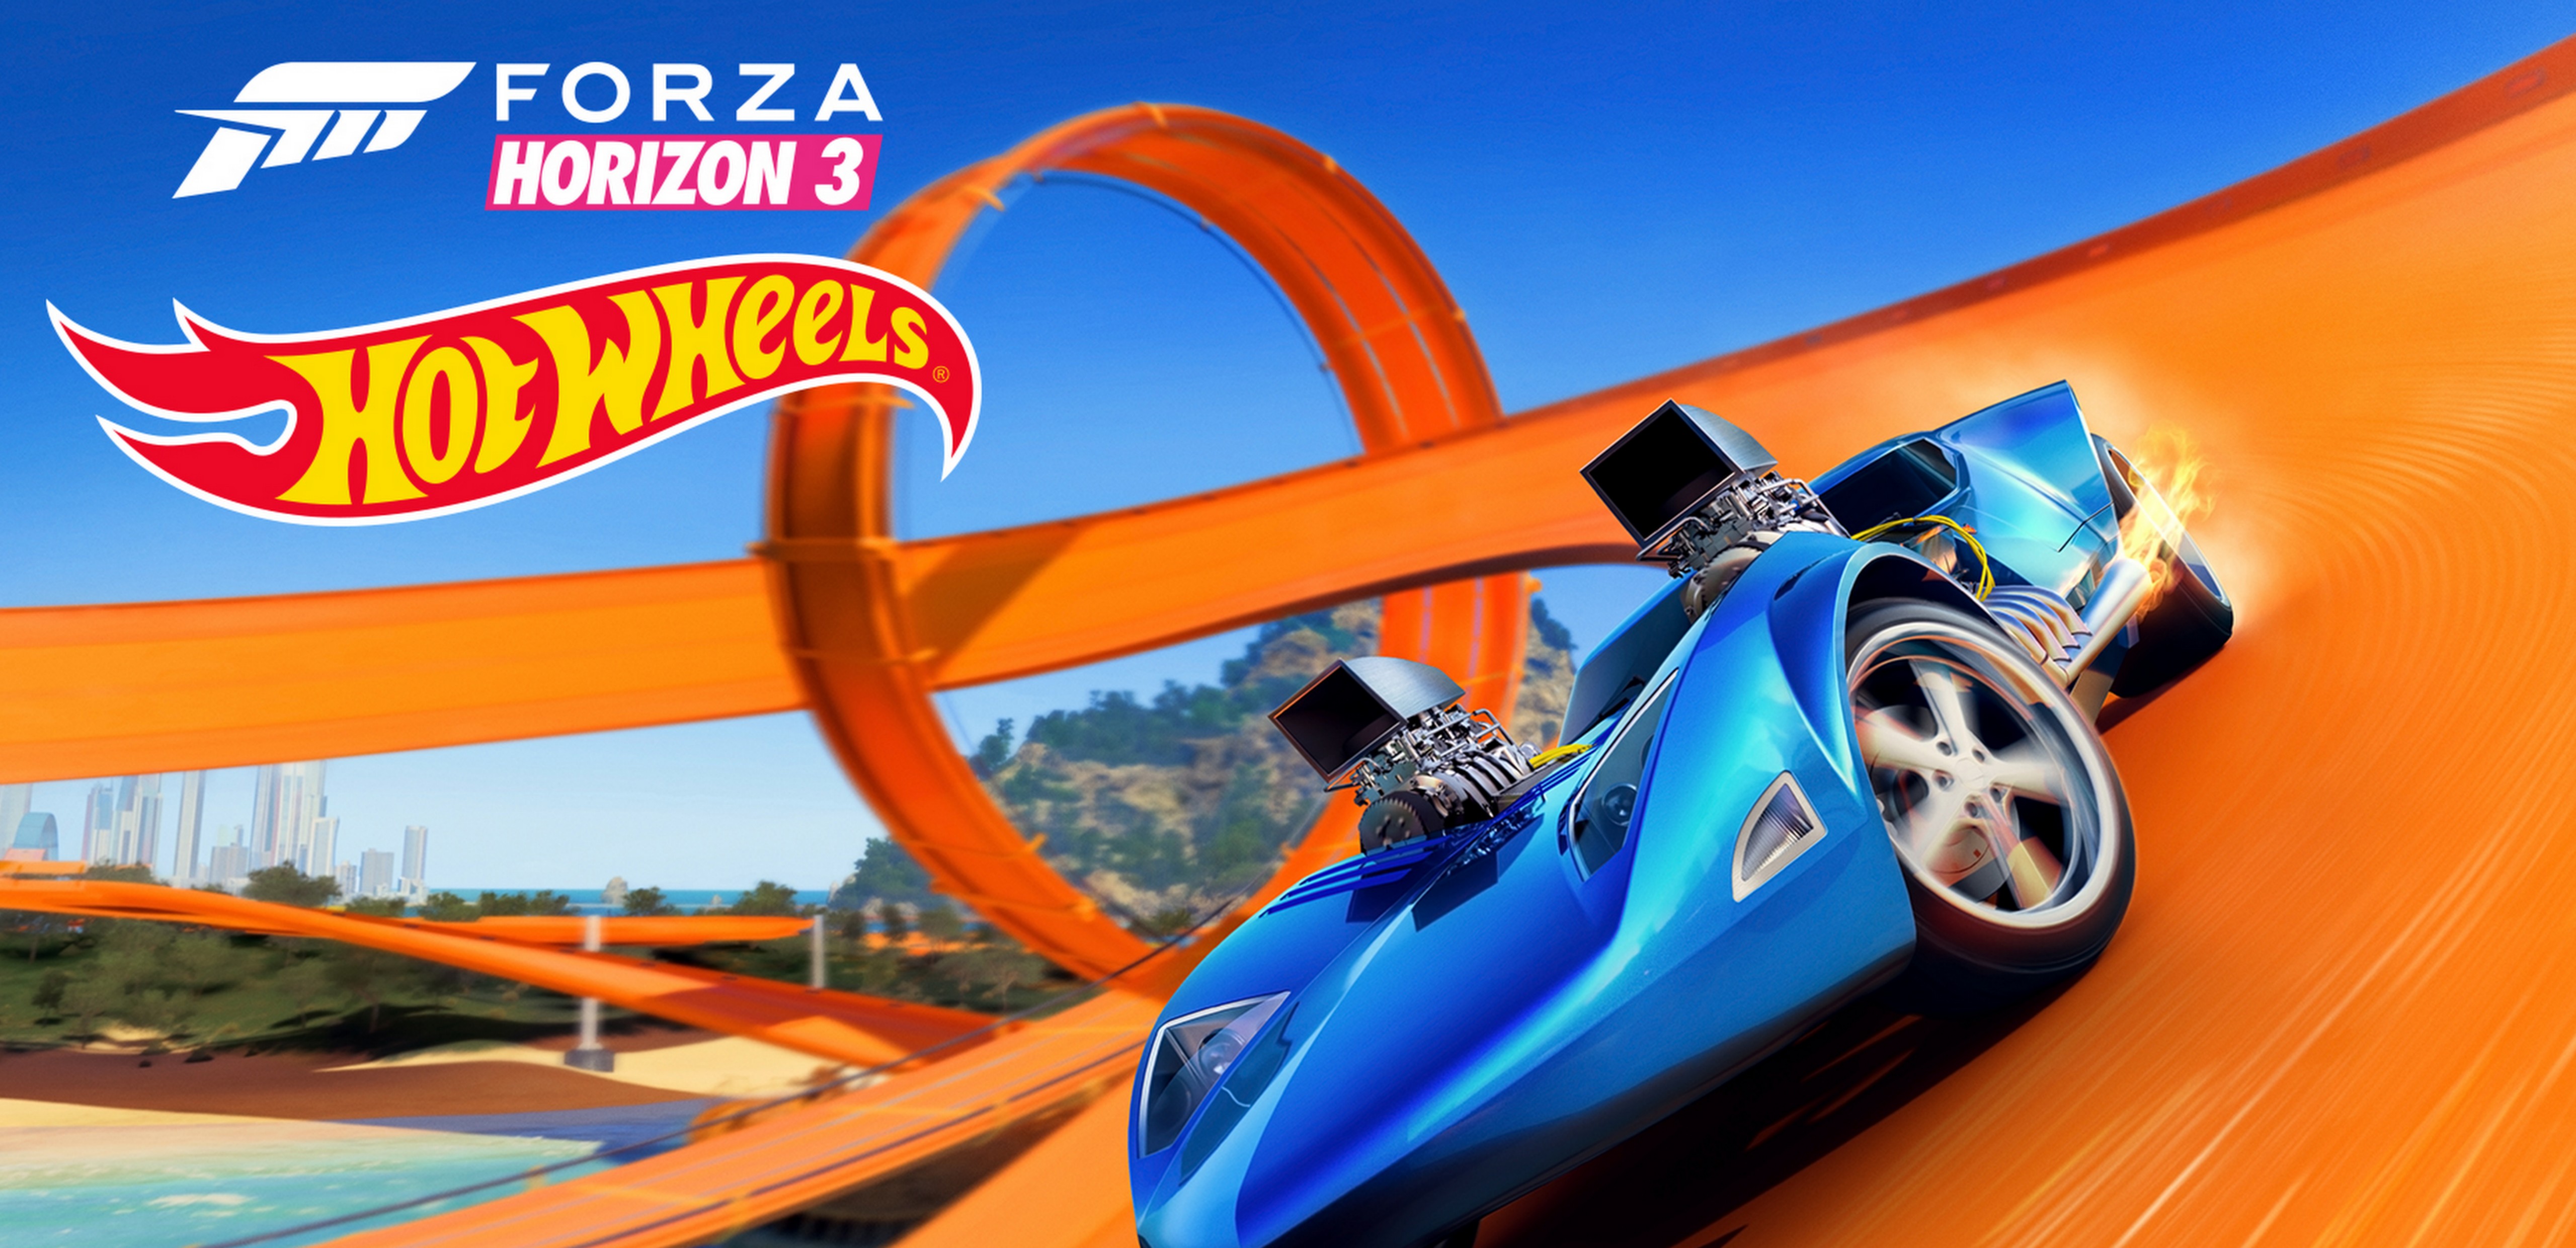 Forza Horizon 3’s Hot Wheels expansion is here!